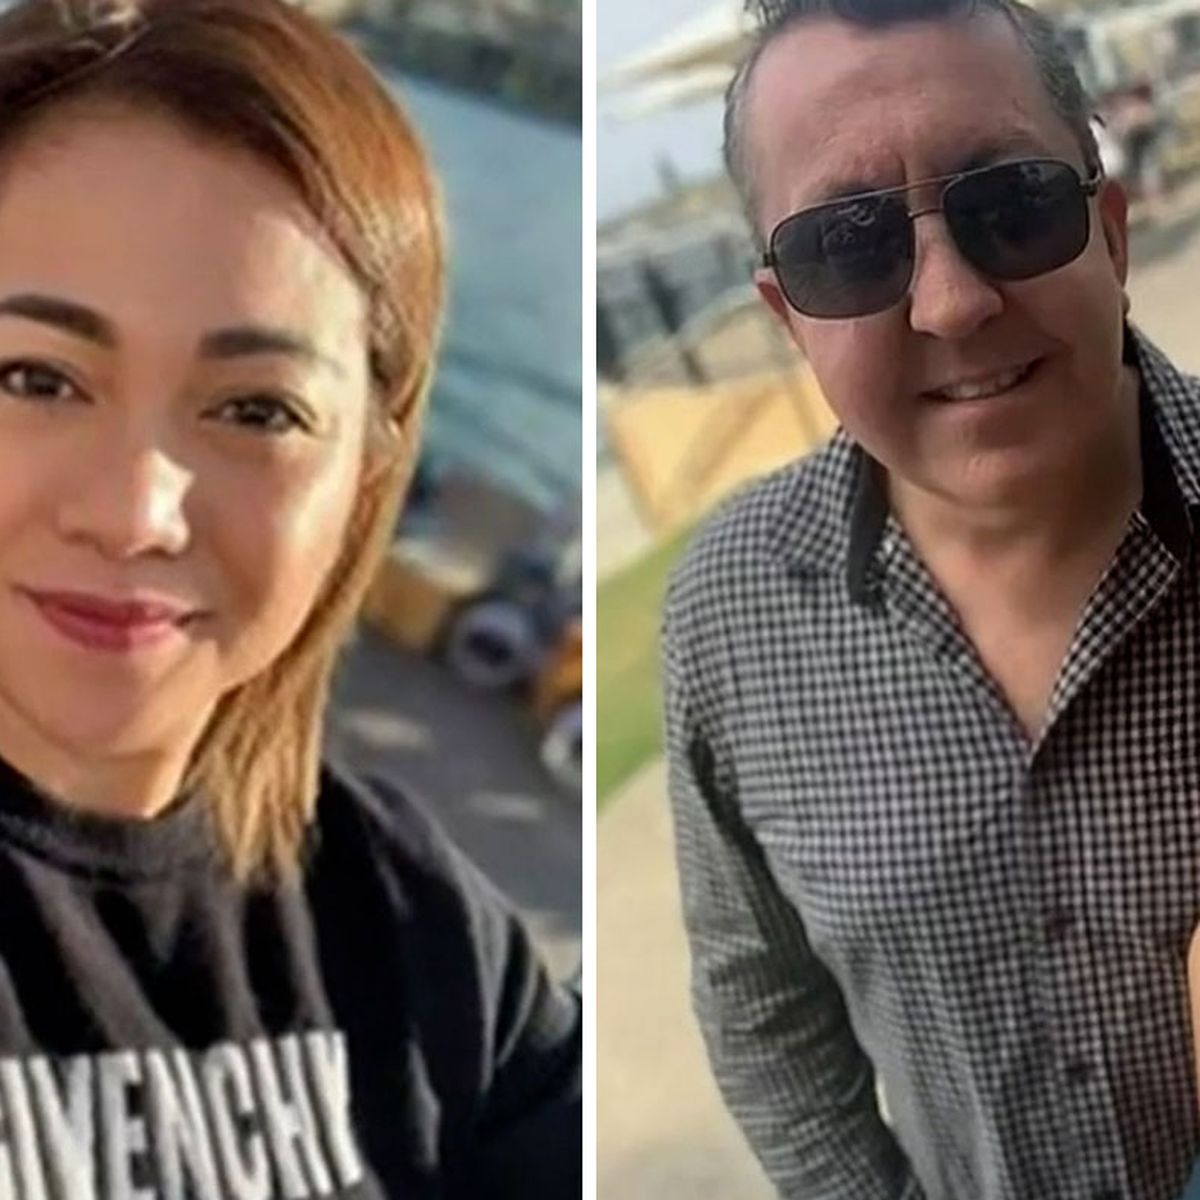 Sydney Couple Offer 70 000 To Filipino Woman They Enslaved